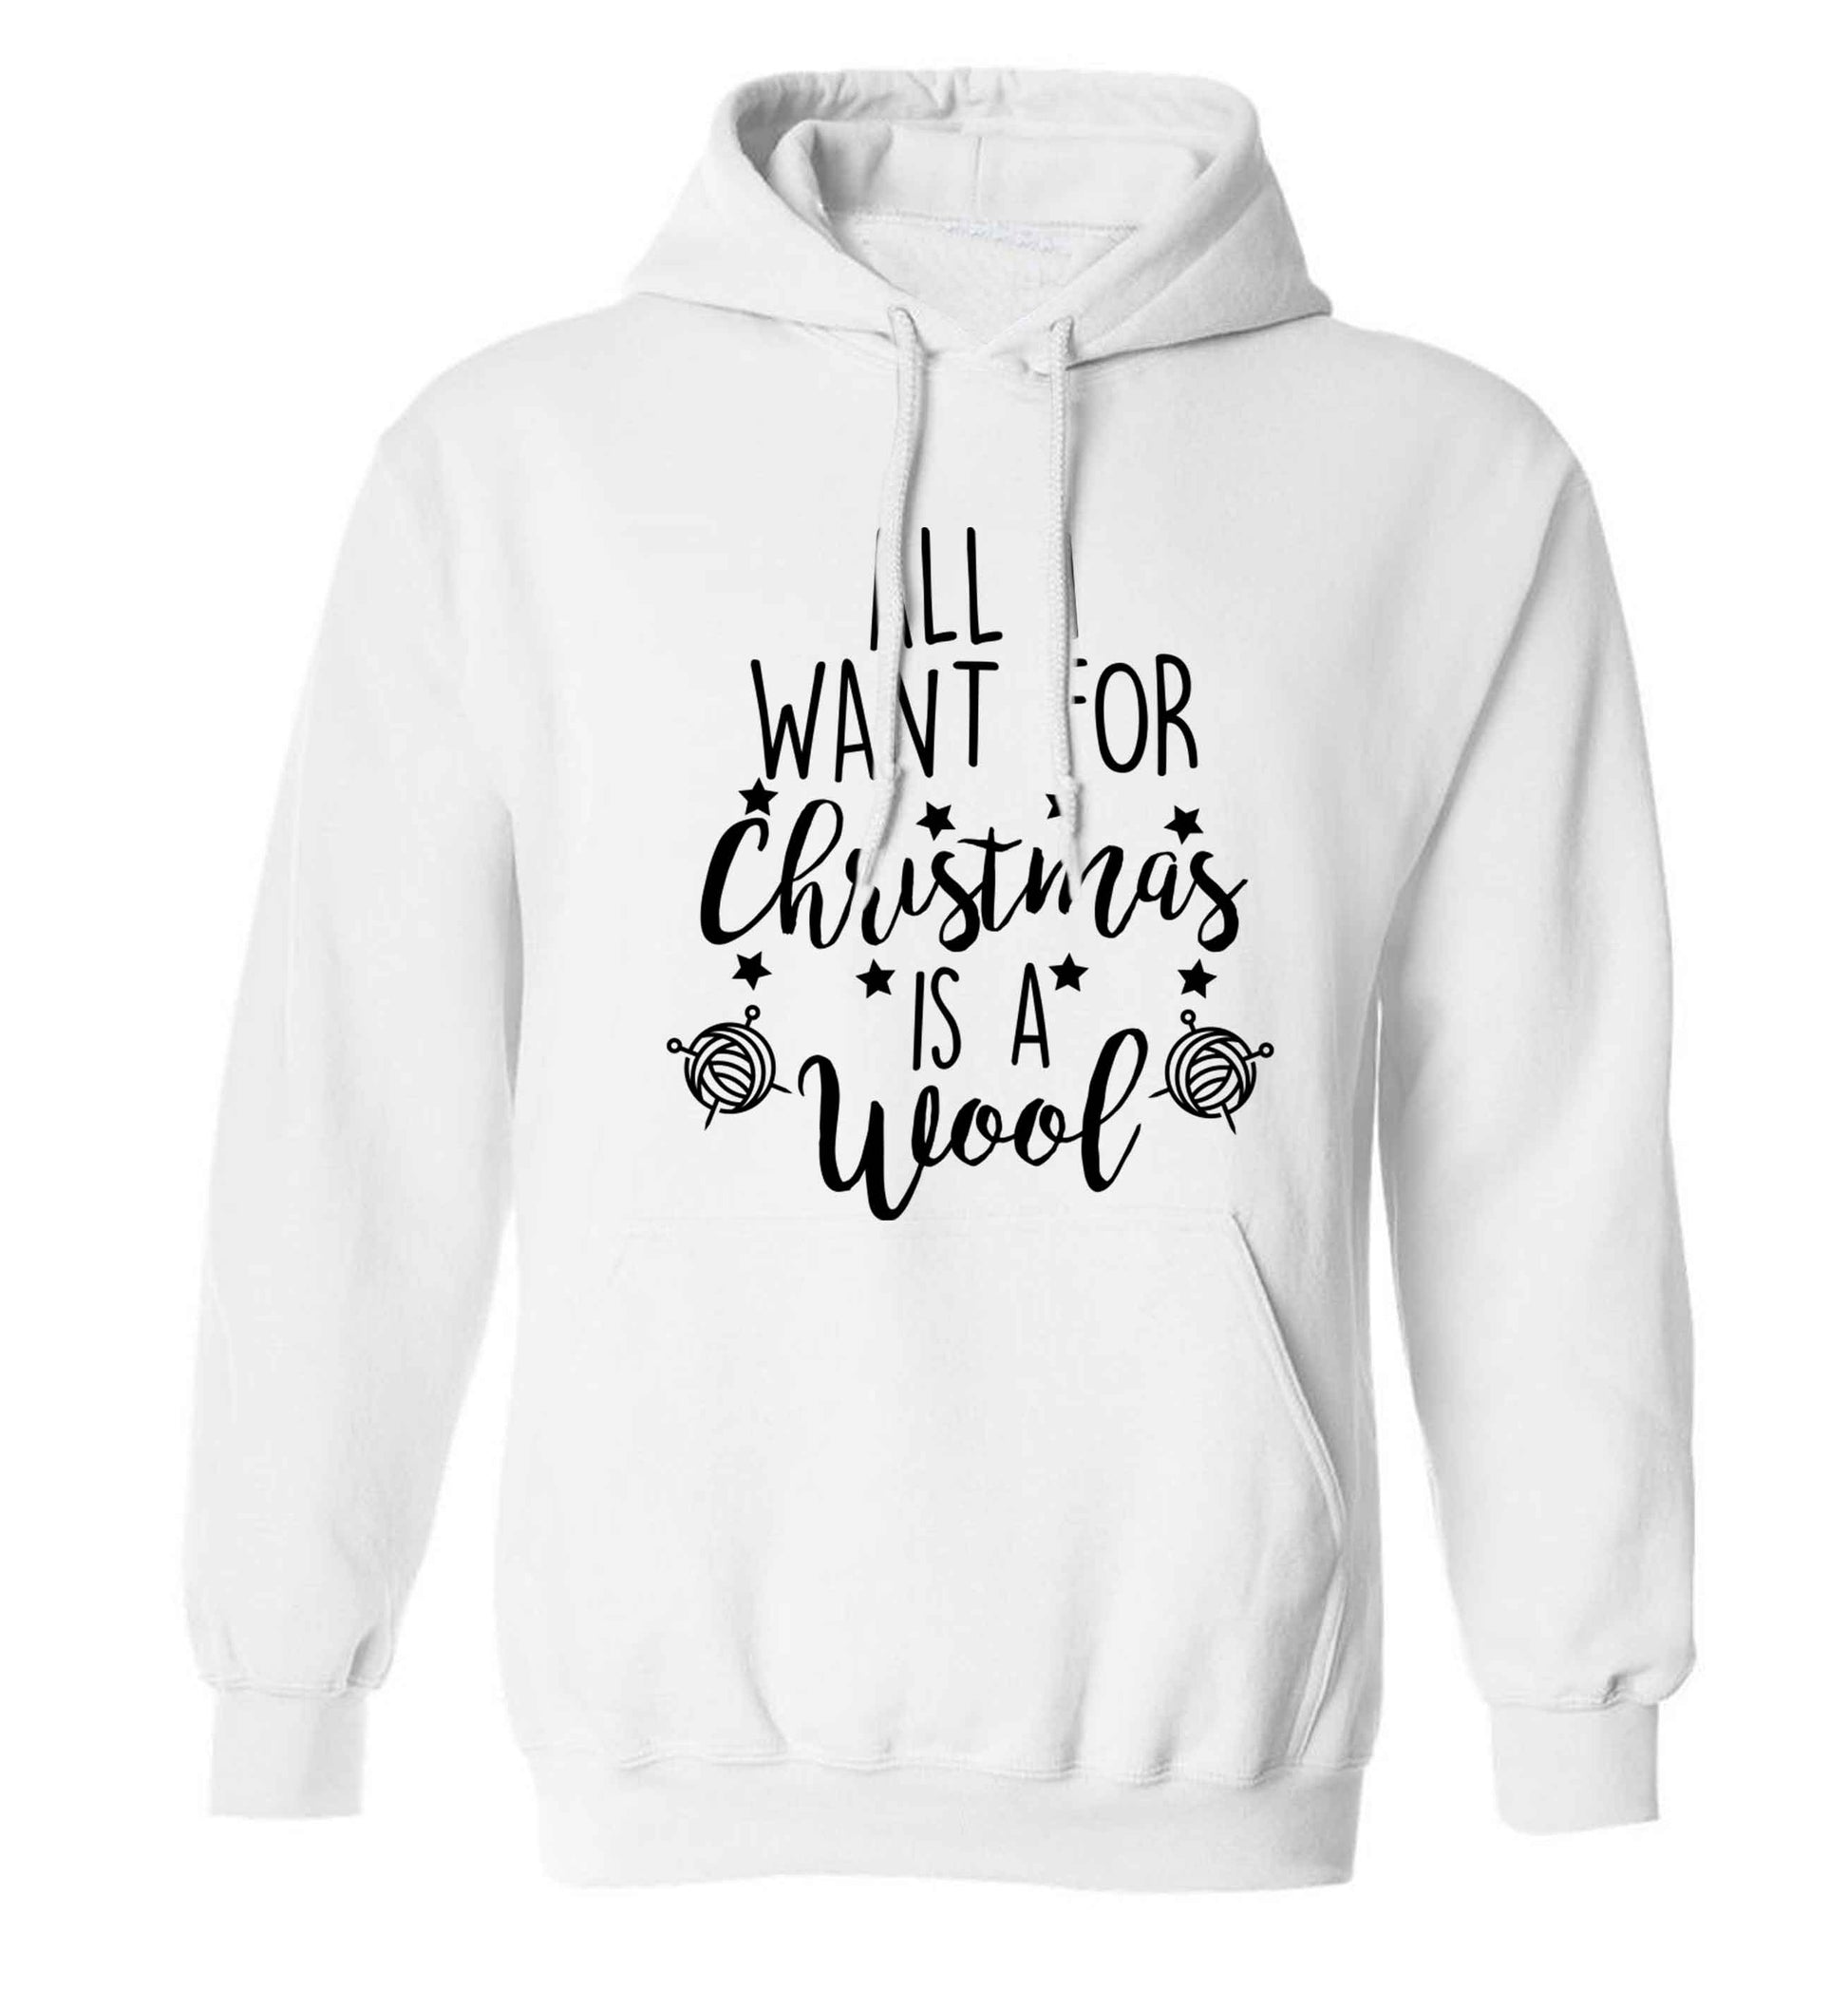 All I want for Christmas is wool! adults unisex white hoodie 2XL